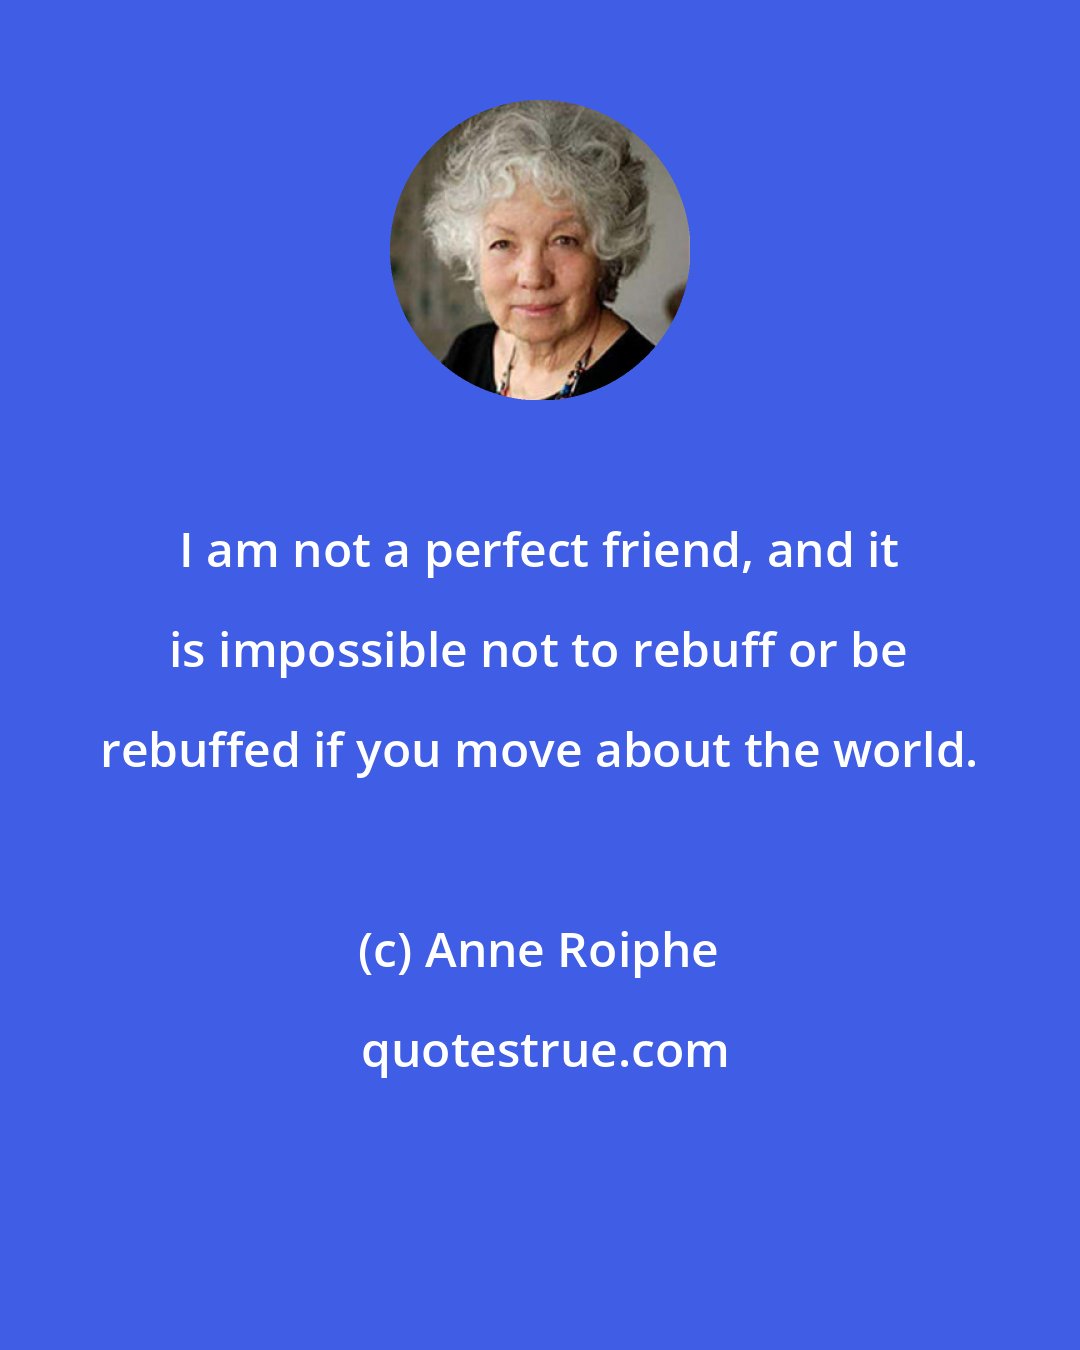 Anne Roiphe: I am not a perfect friend, and it is impossible not to rebuff or be rebuffed if you move about the world.